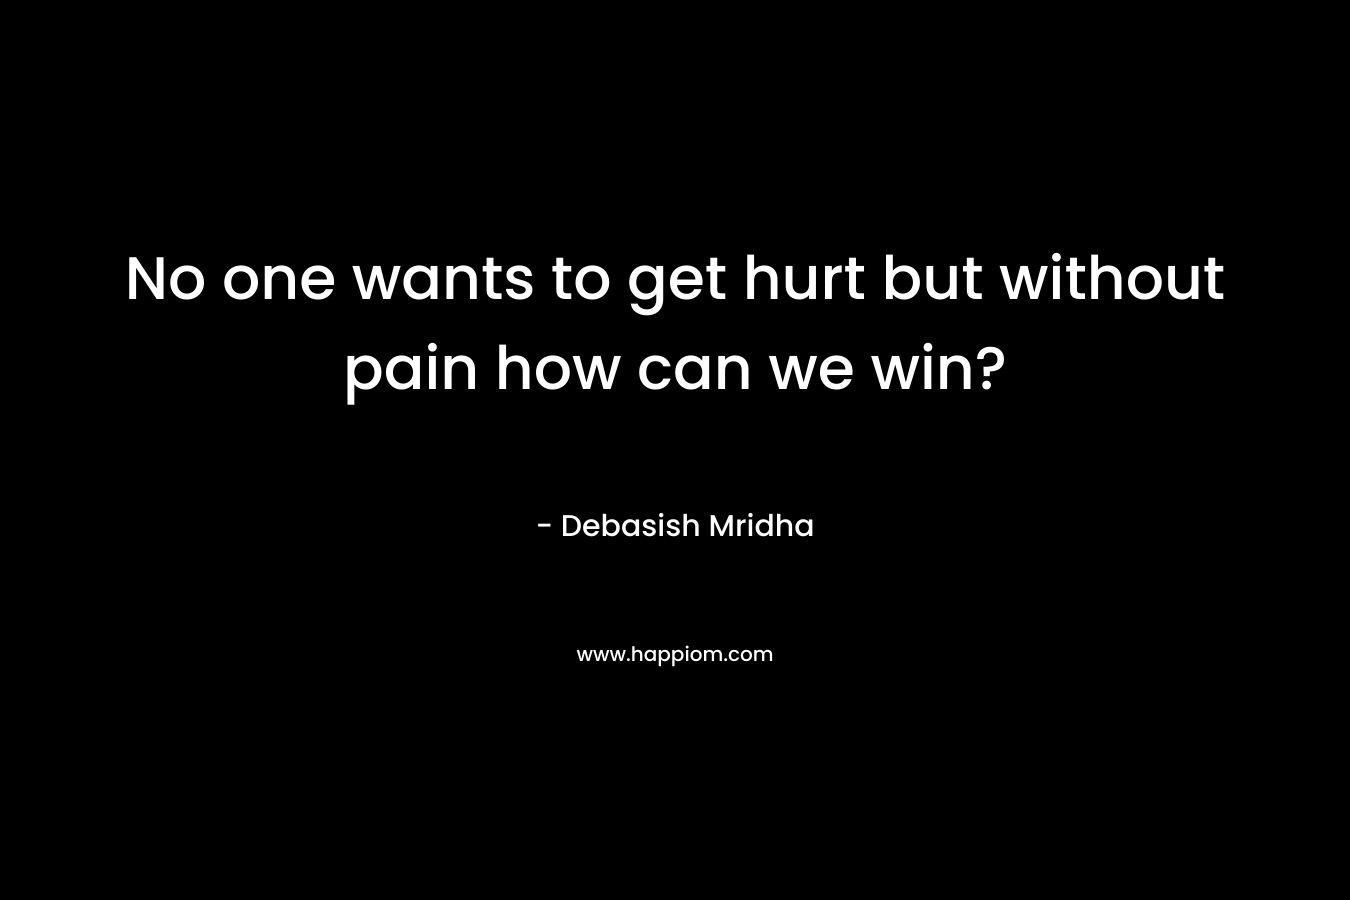 No one wants to get hurt but without pain how can we win?